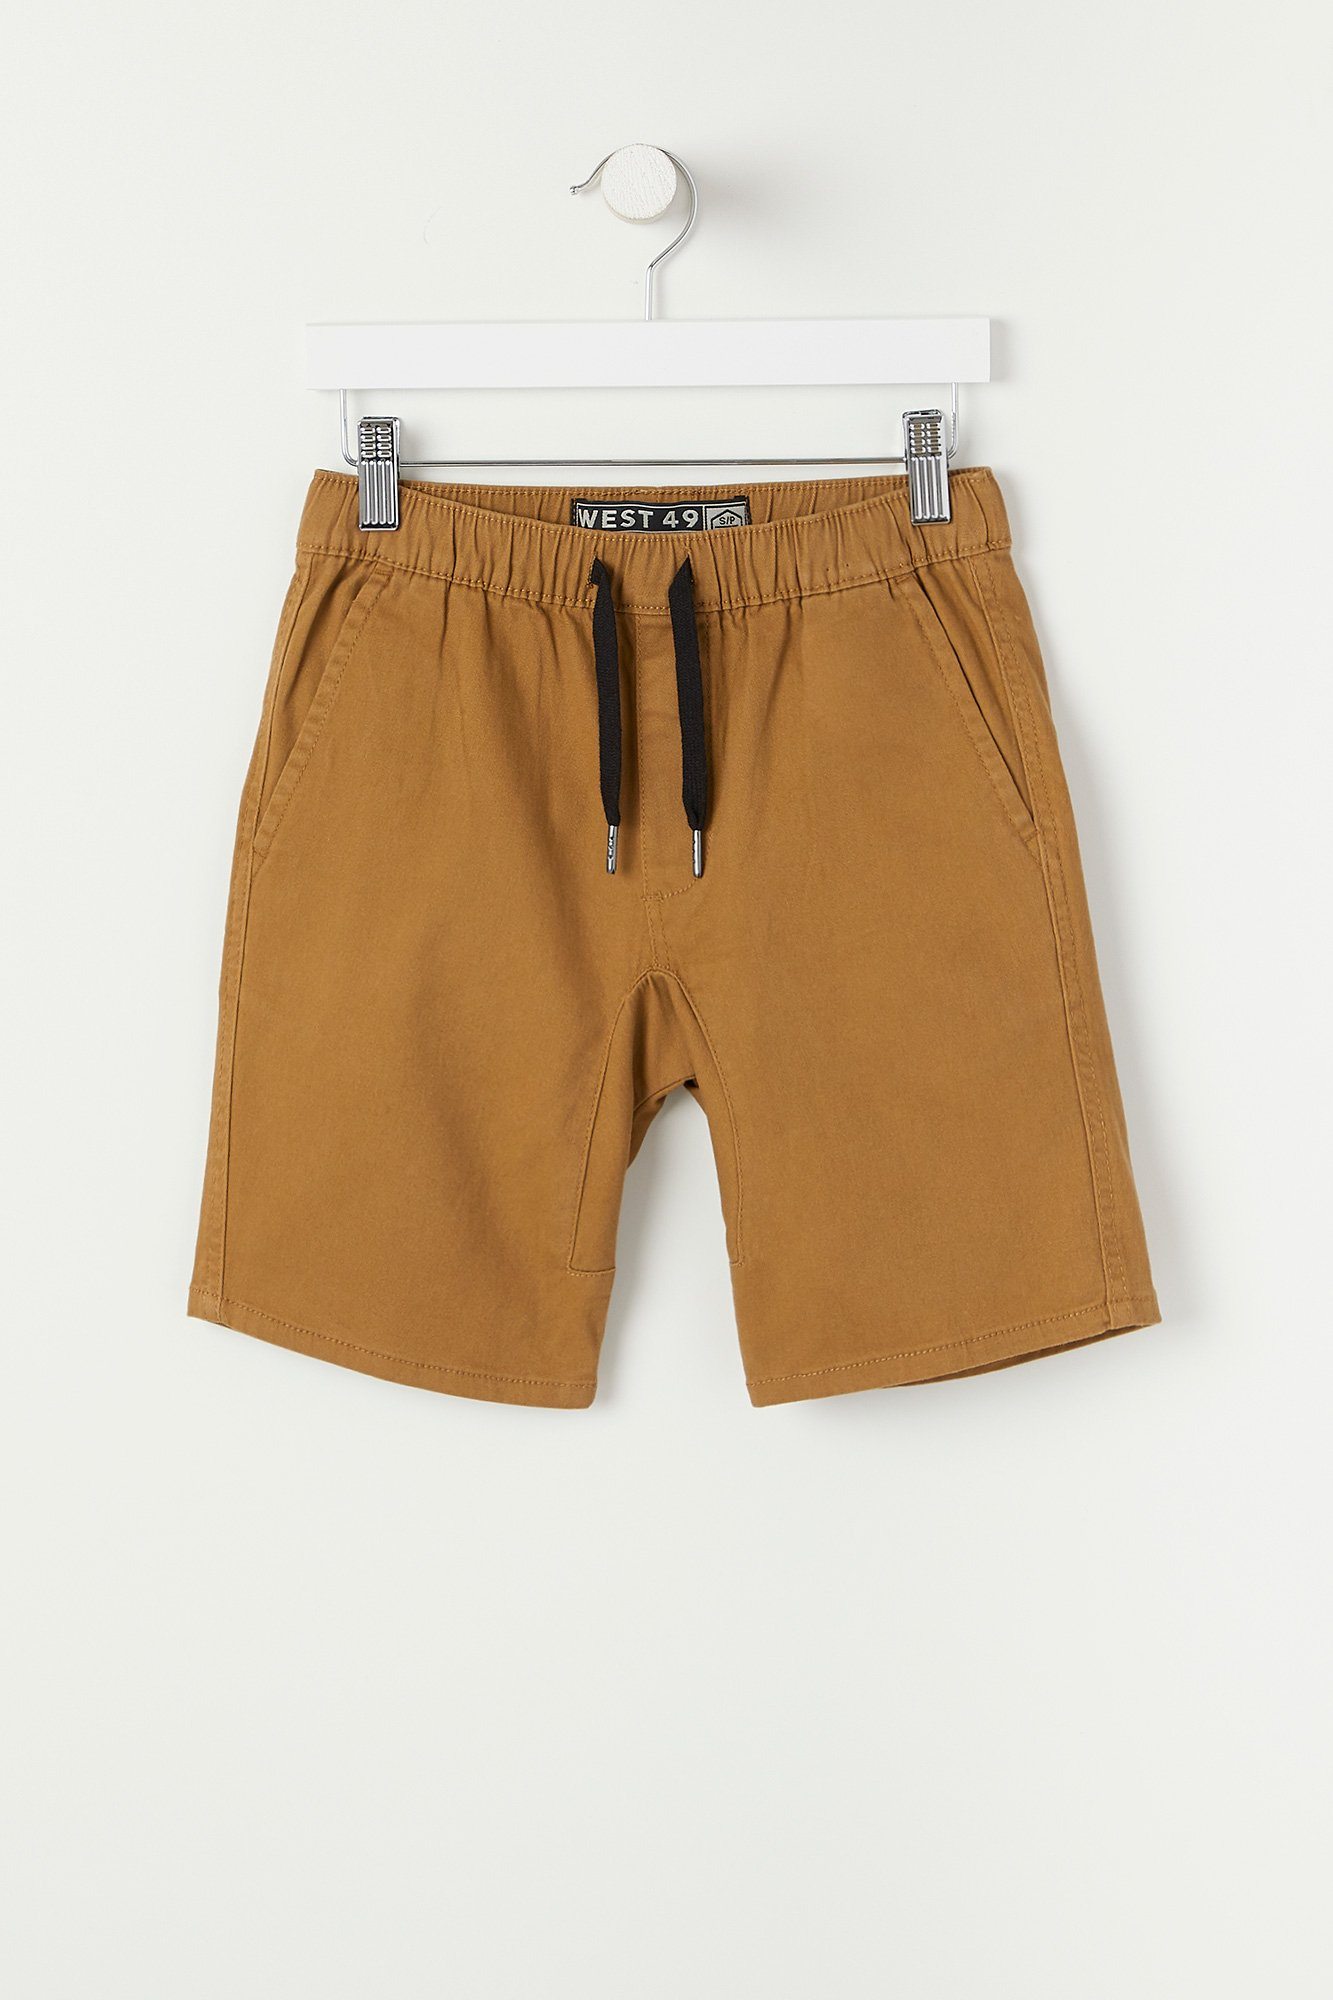 Image of West49 Youth Solid Twill Jogger Shorts